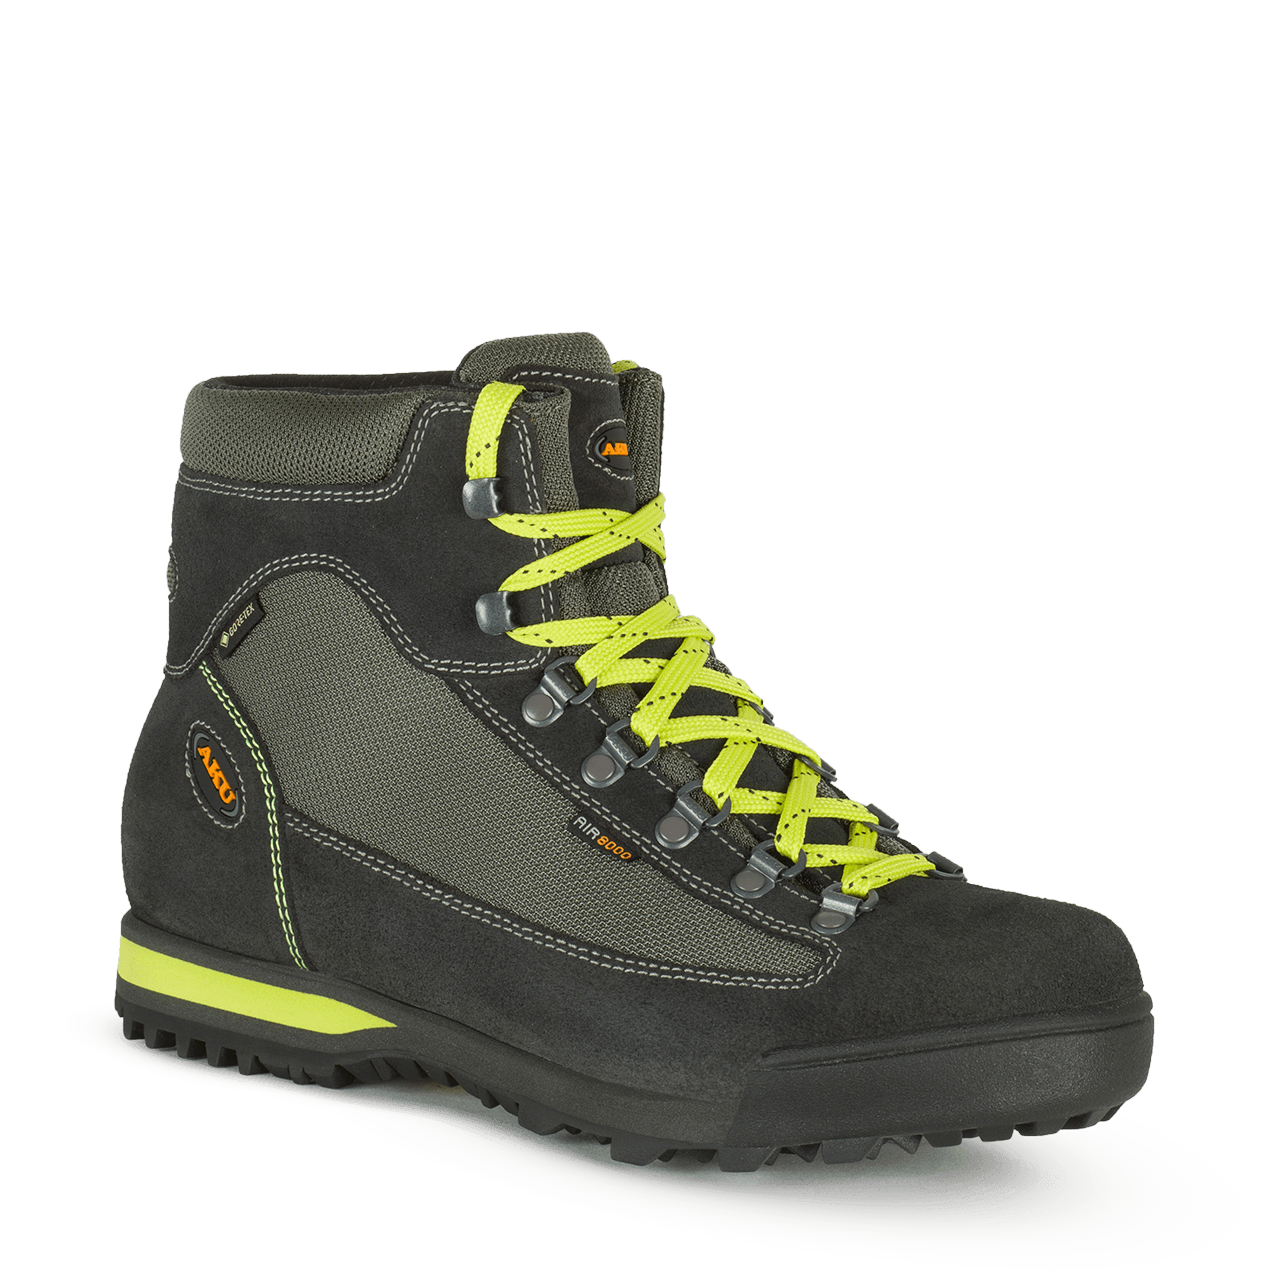 Slope Micro GTX antracite-lime